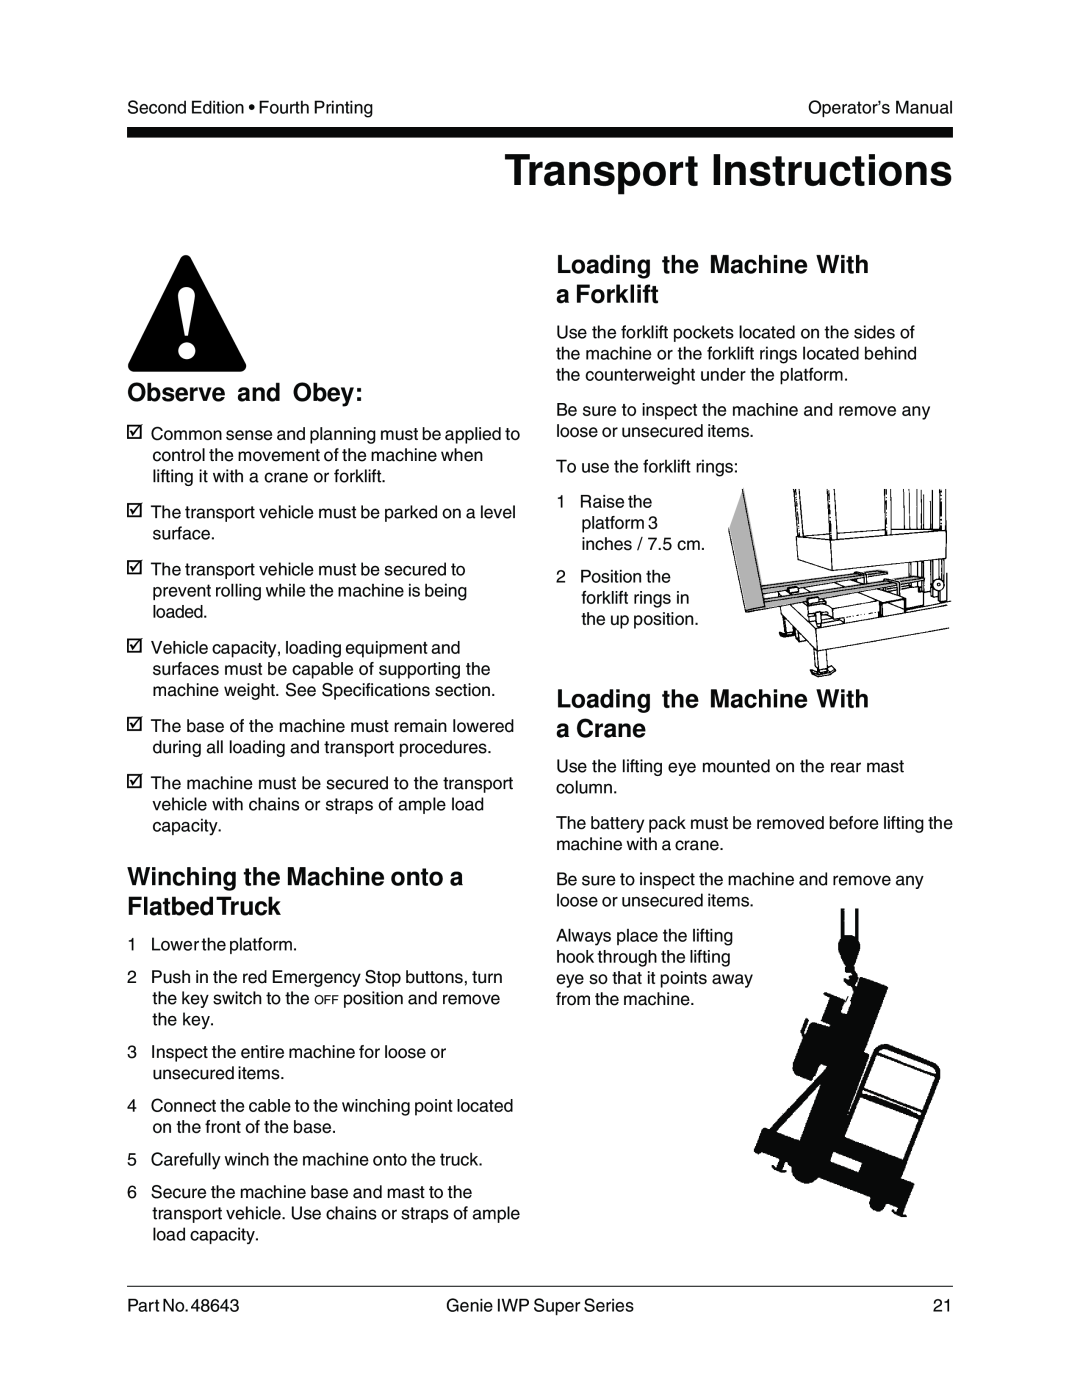 Genie 48643 manual Transport Instructions, Winching the Machine onto a FlatbedTruck, Loading the Machine With a Forklift 